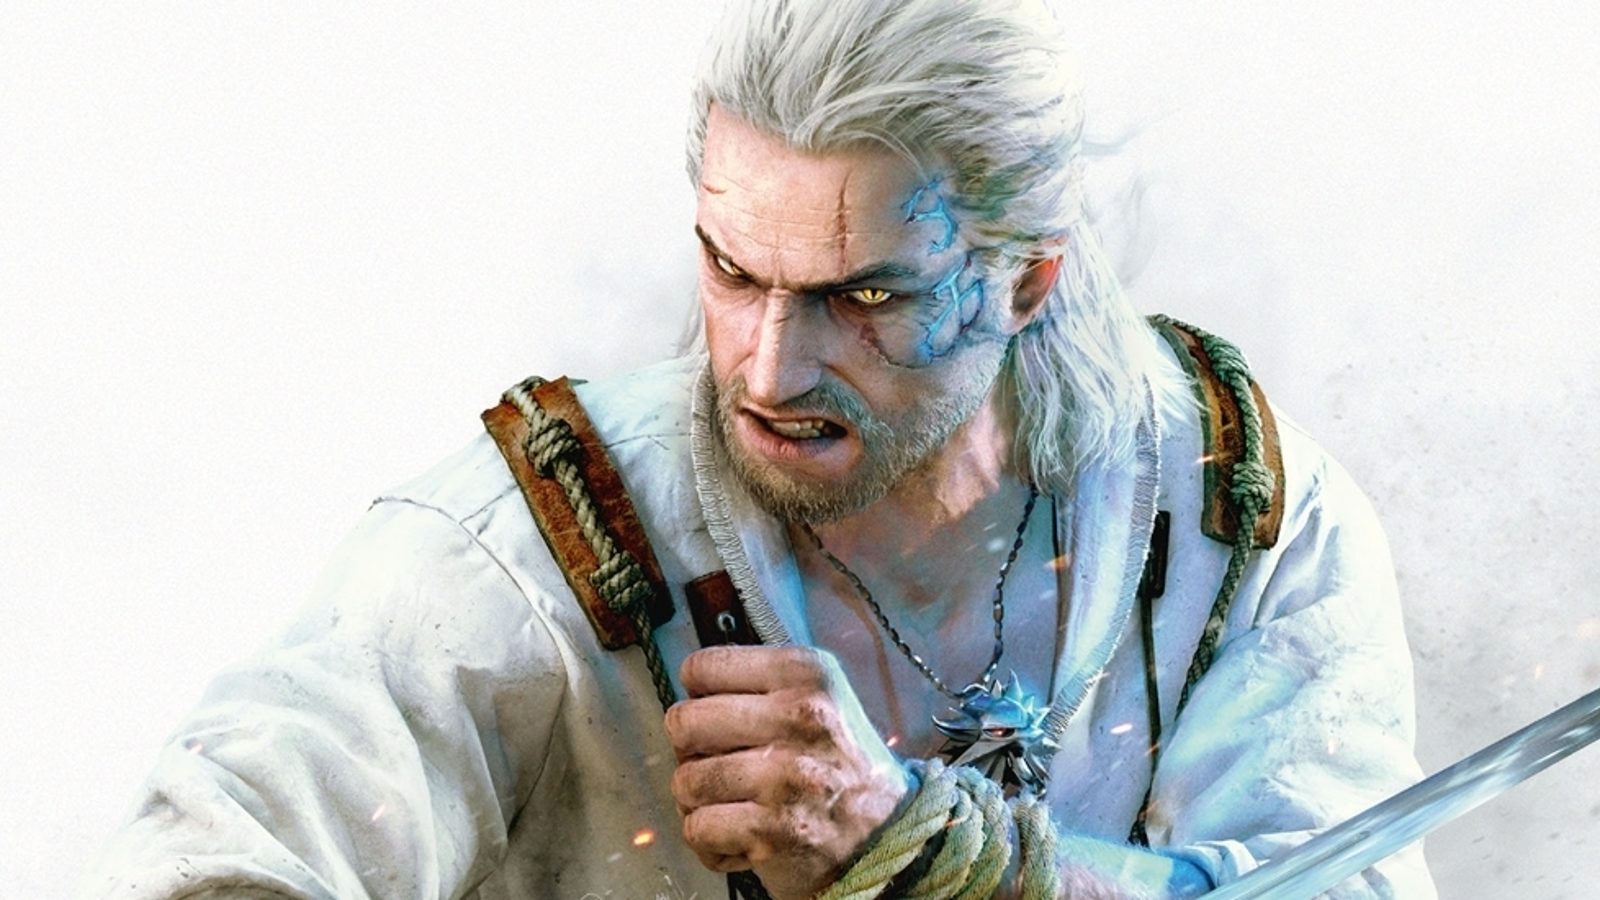 The Witcher 3: Wild Hunt Review - Graphics - Overclockers Club